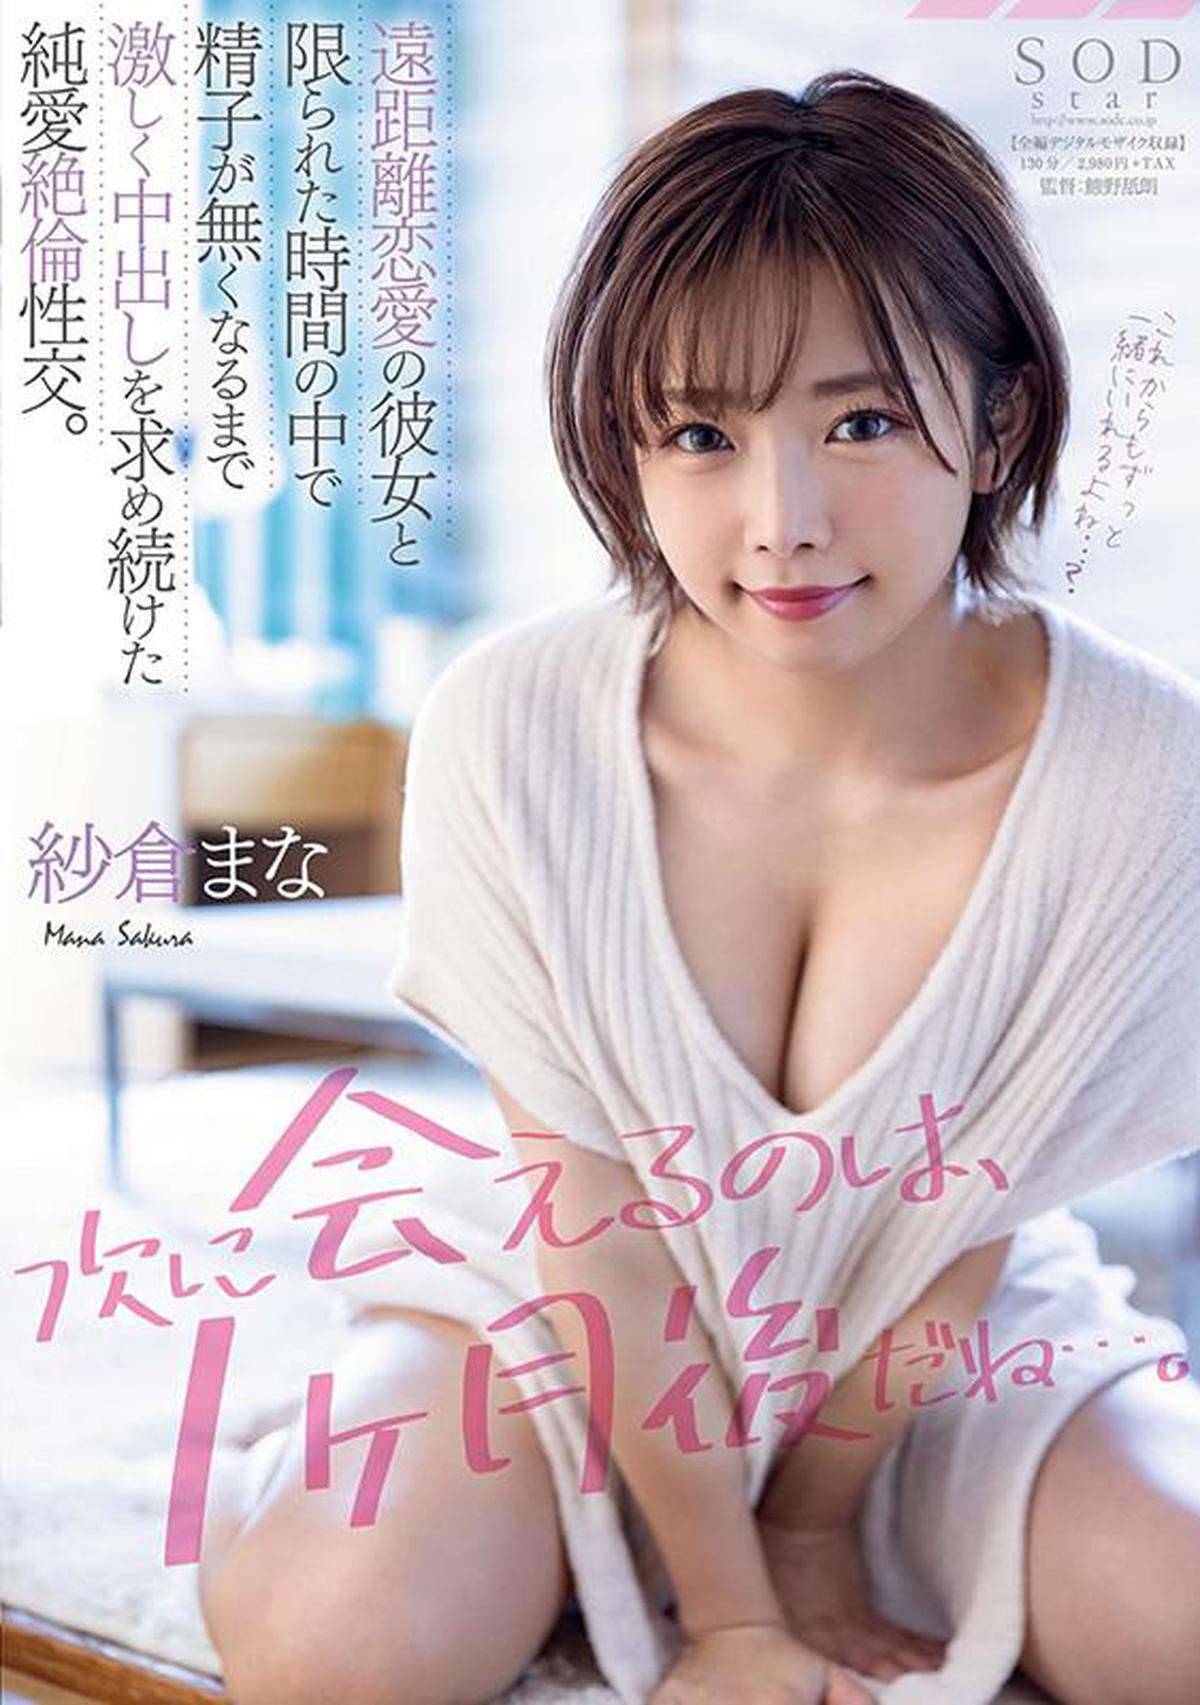 STARS-279 "The next time I can meet you is one month later ..." Pure love unequaled sexual intercourse that kept asking for vaginal cum shot until the sperm disappeared in a limited time with her long-distance relationship. Mana Sakura